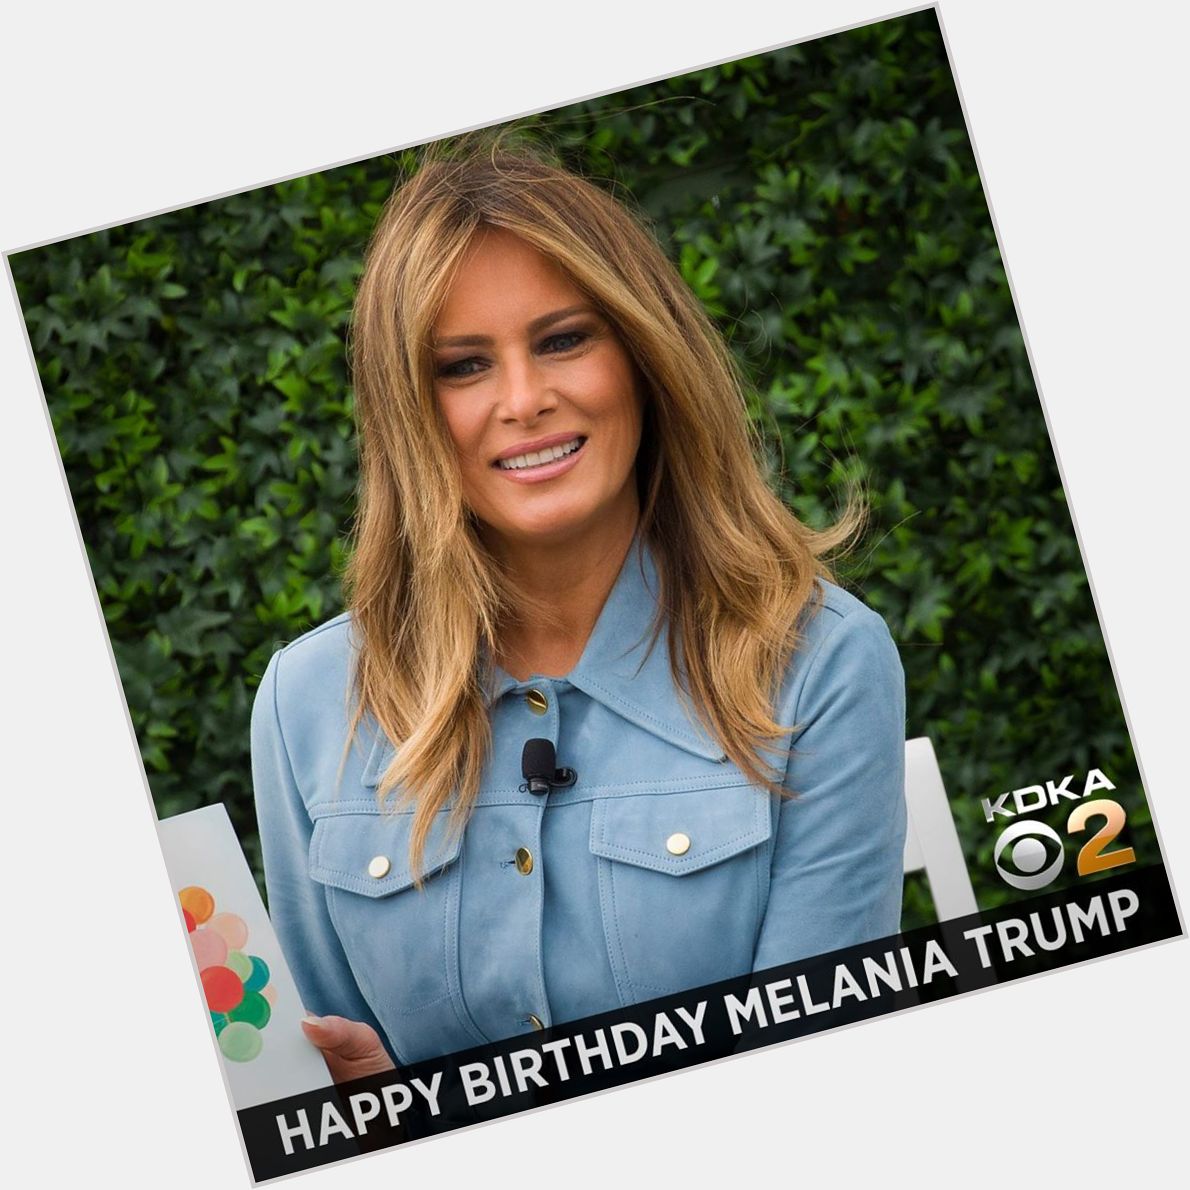 Happy birthday to the First Lady of the United States, Melania Trump! 